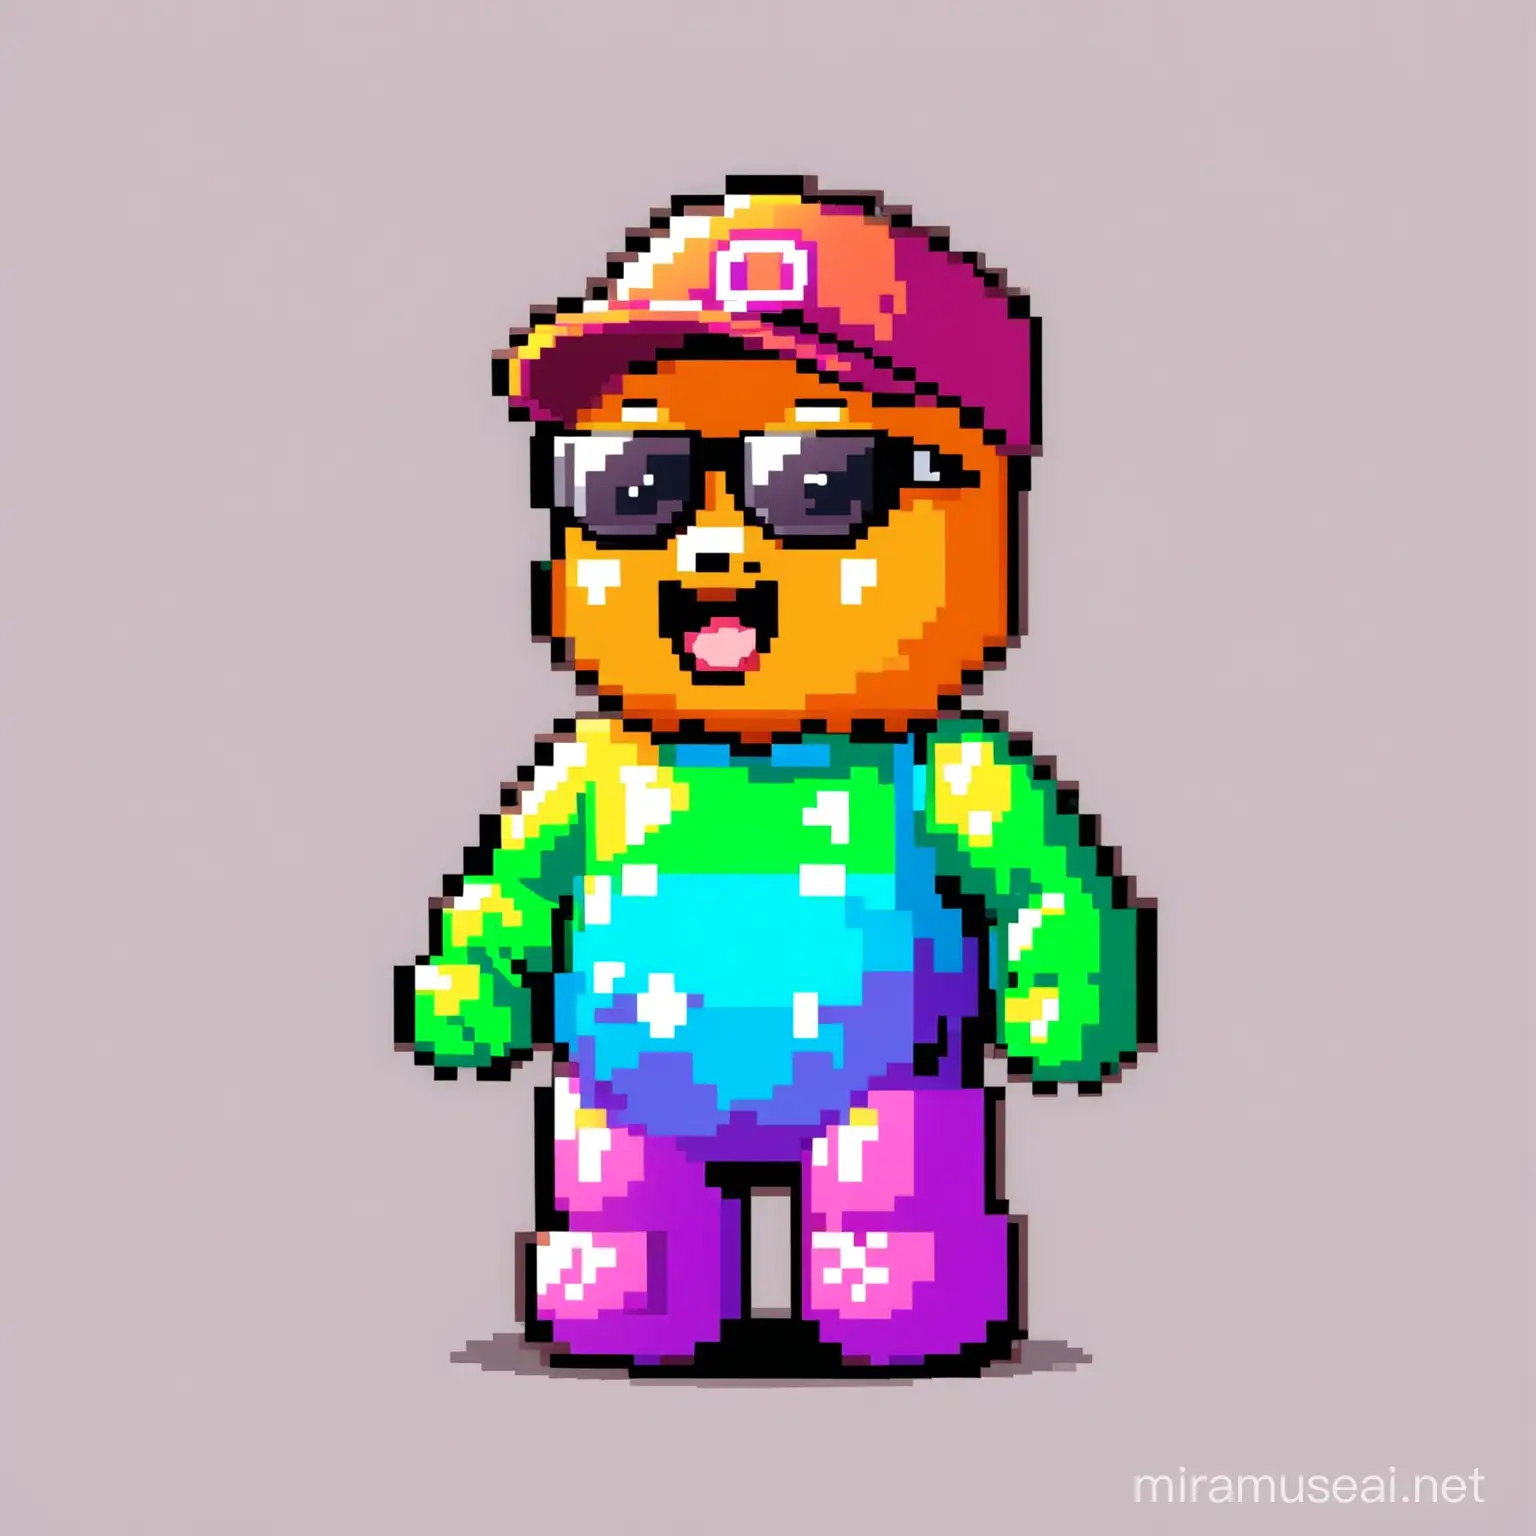 Funny and raandom colored 8 Bit solo gummy bear Mascot for Crypto Meme Token. Random accessories like cap or sunglasses or joint